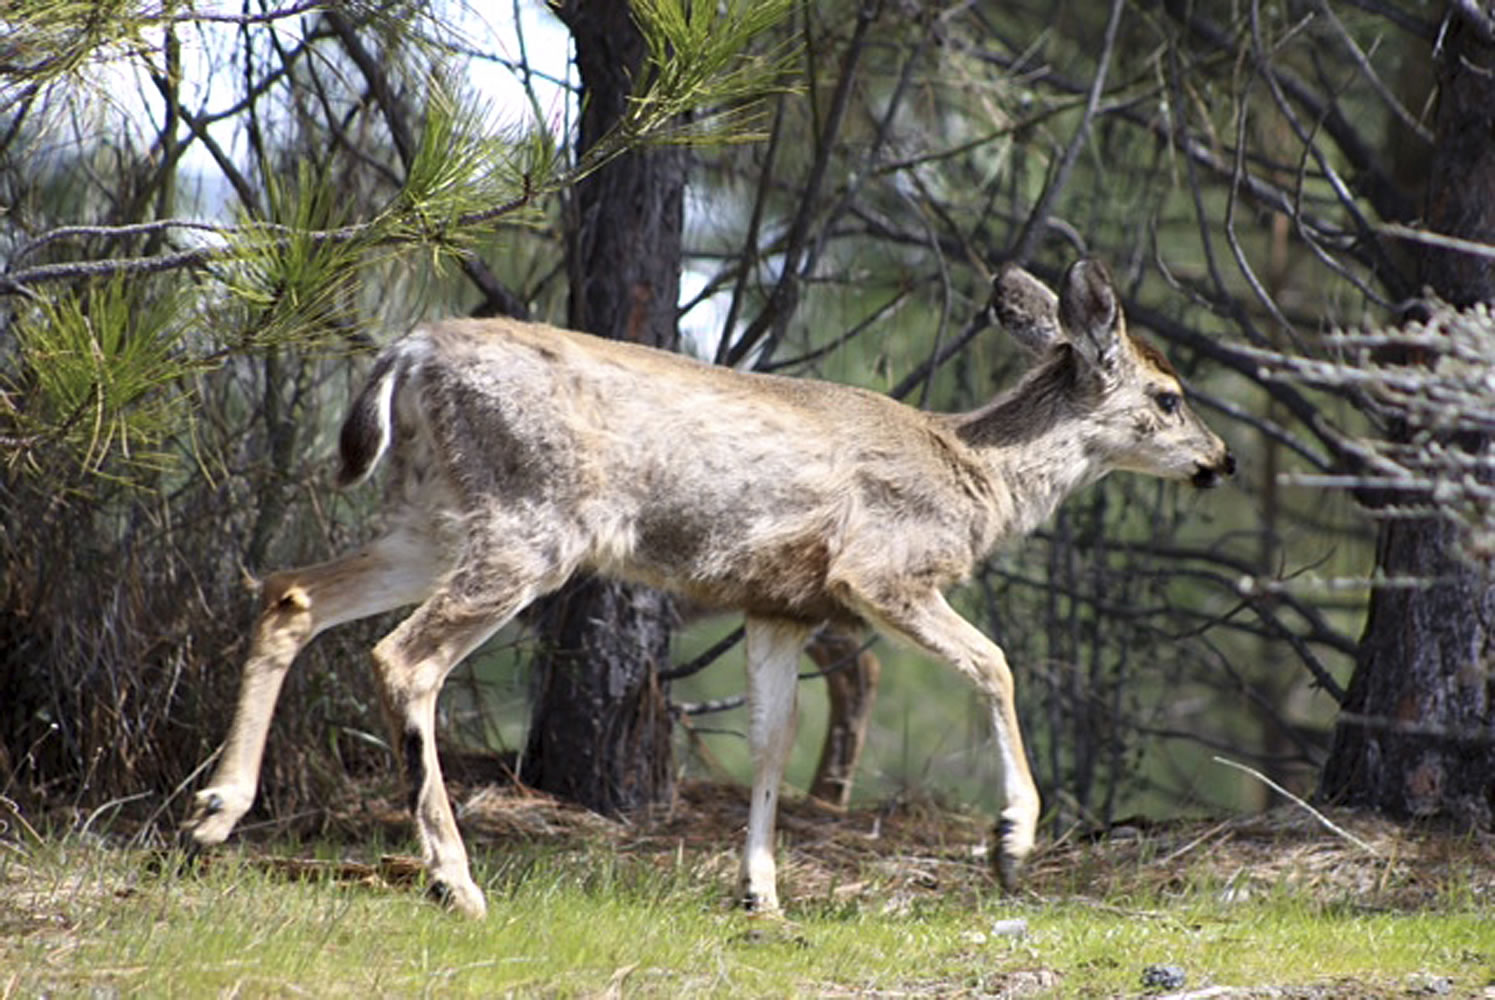 California wildlife officials say an invasion of aggressive lice is causing deer across the state to go bald.